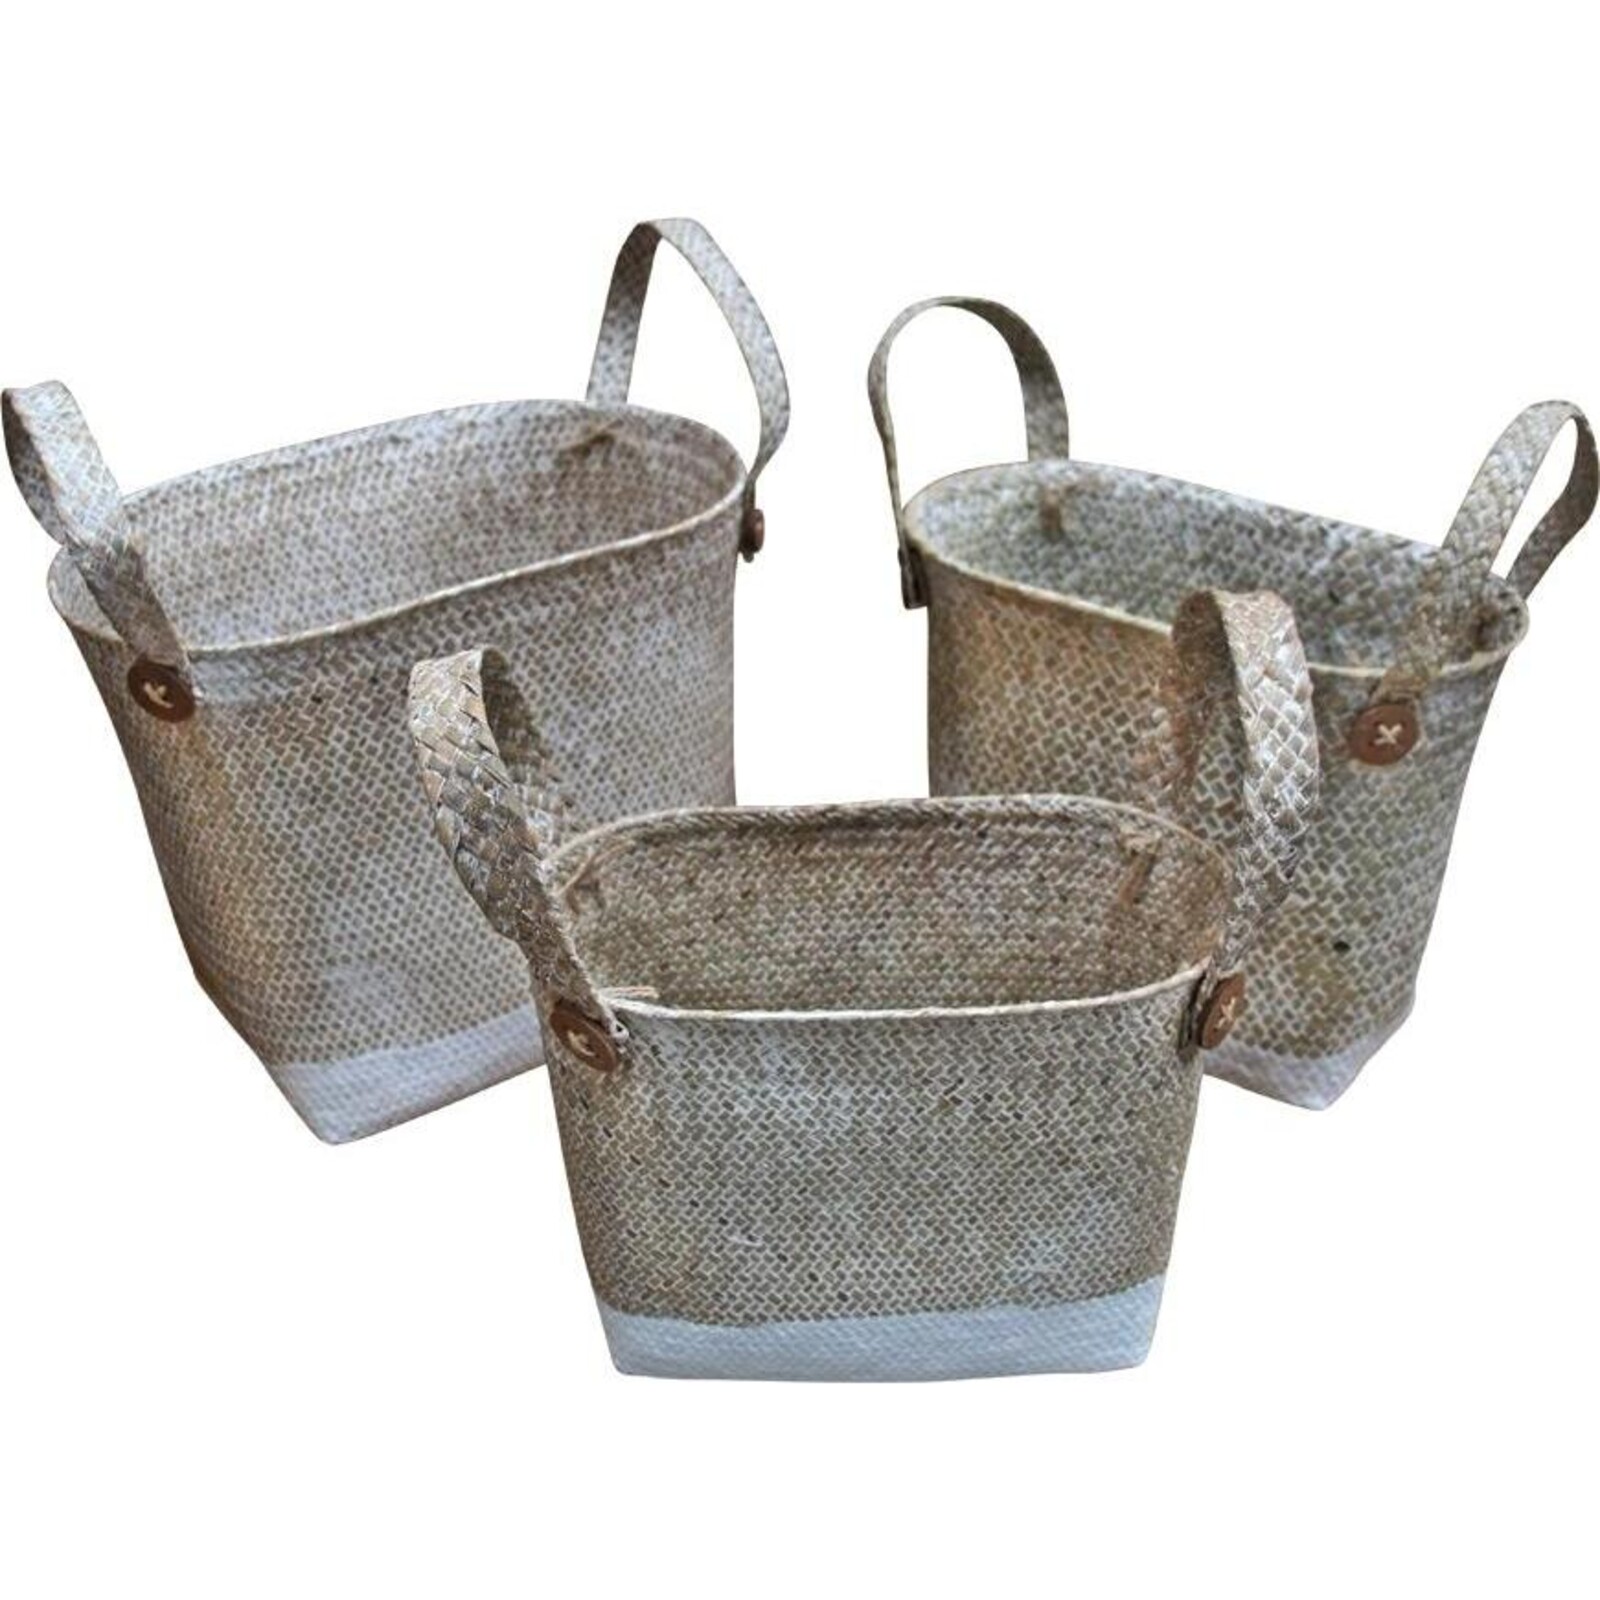 Woven Button Dipped Basket Oval S/3